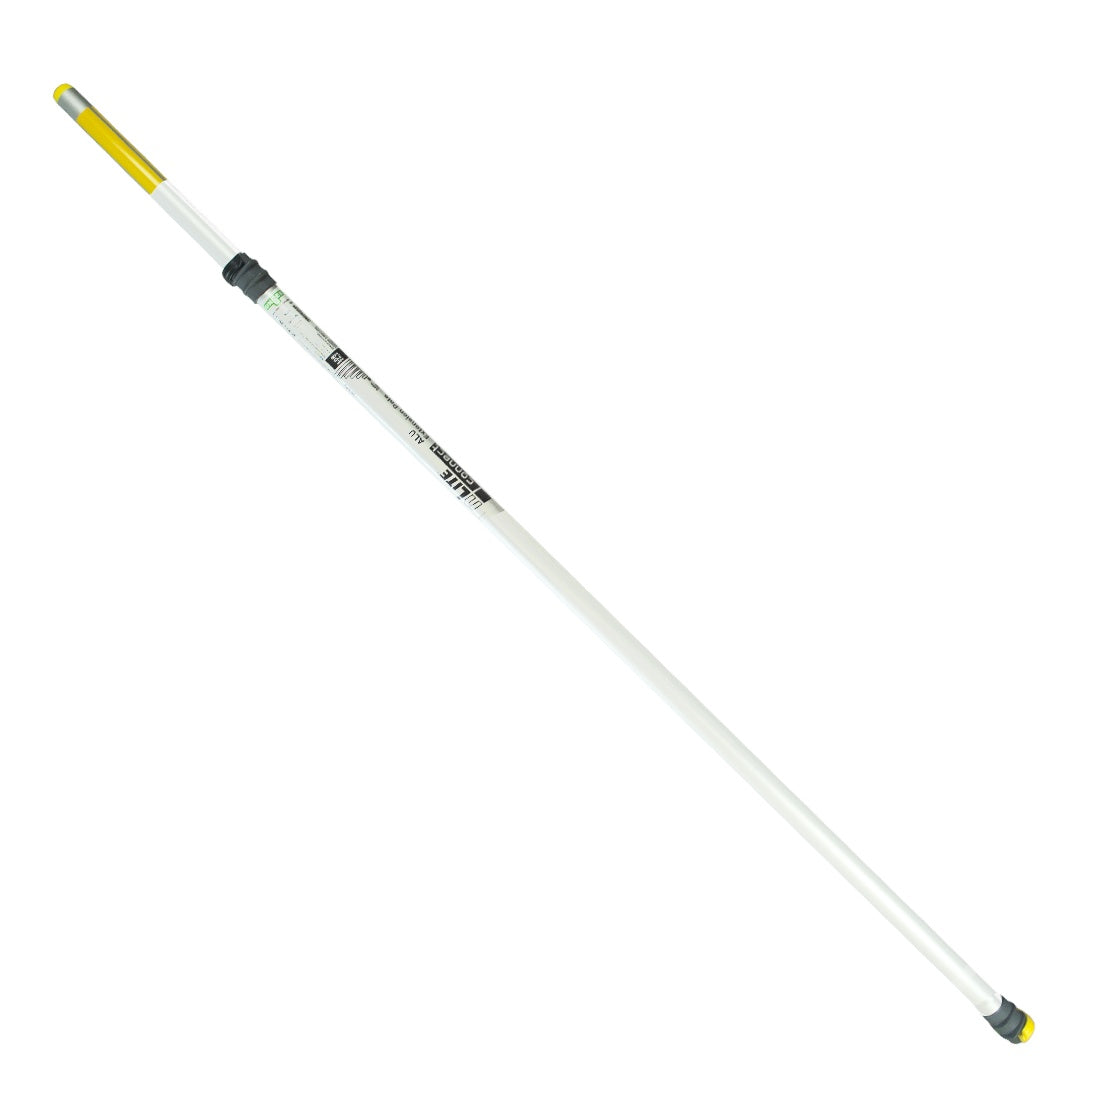 Unger nLite Aluminum Extension Pole - 10 Foot - Tilted Right Front View